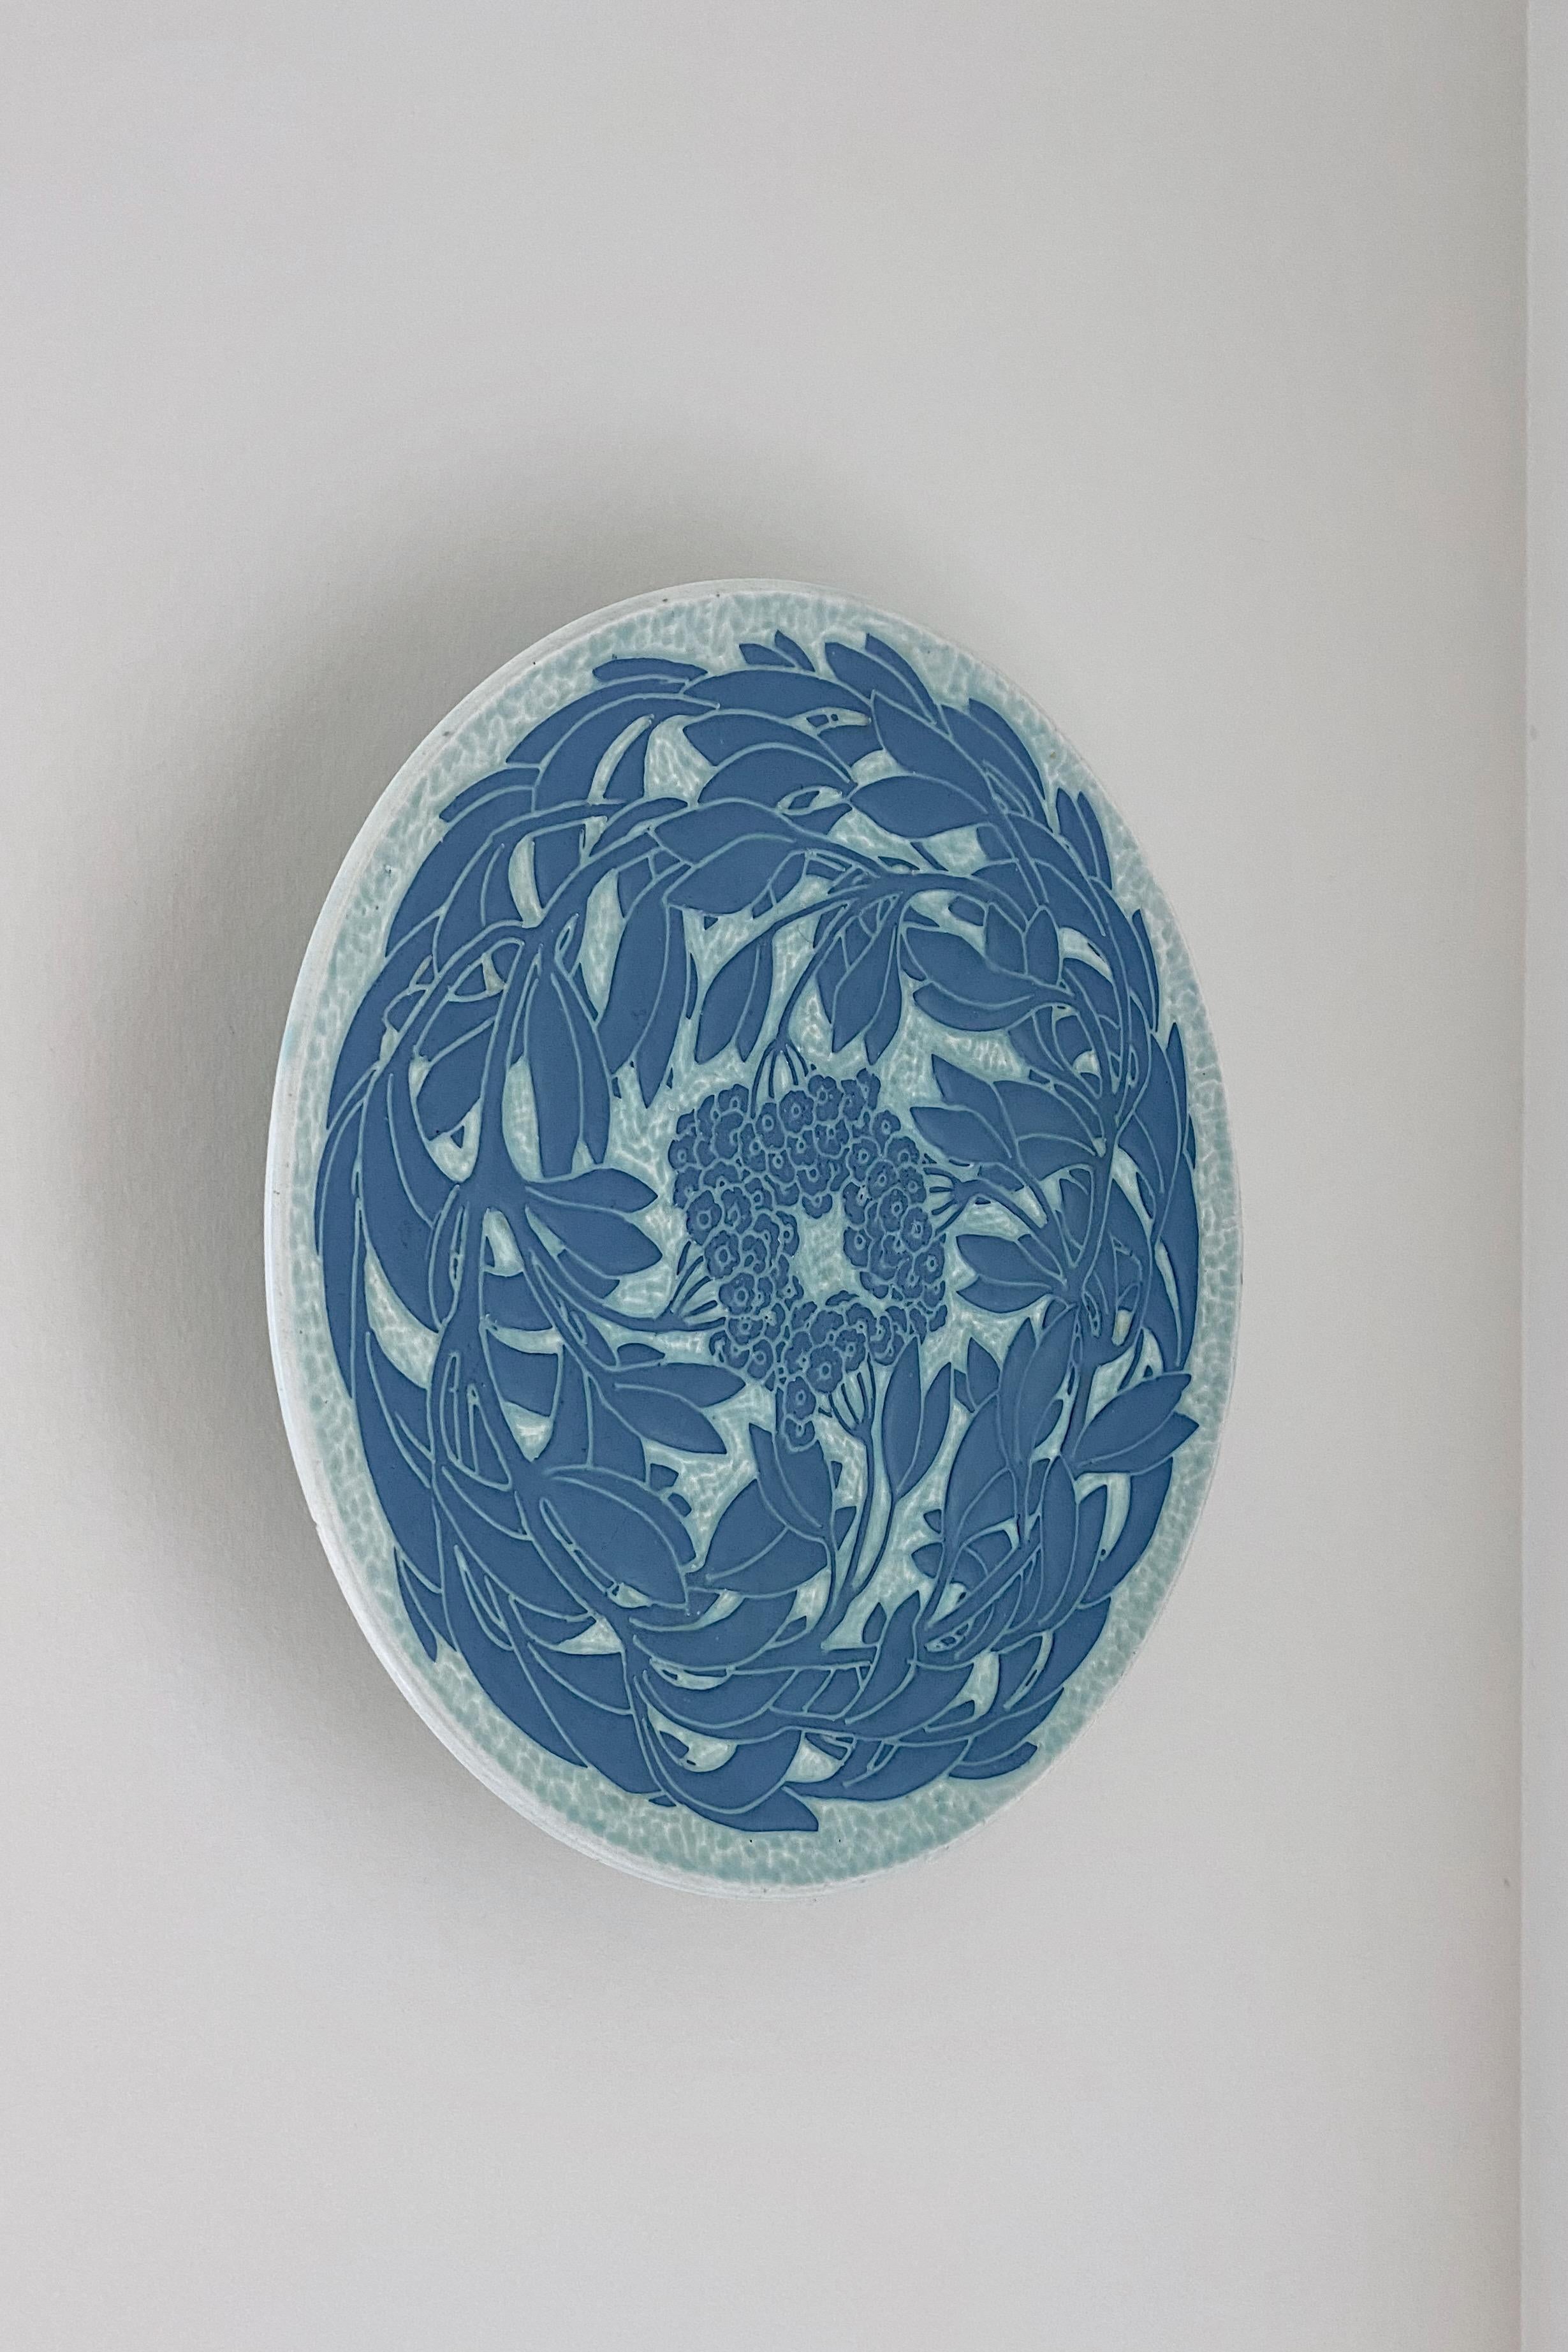 Decorative Sgraffito plate from 1914 by Elsa Engström for Gustavsberg, Sweden. Beautiful flower motif in Swedish Jugend (or Art Nouveau) style. Her signature is visible at the bottom with the year 1914 and Gustavsbergs name. In great vintage